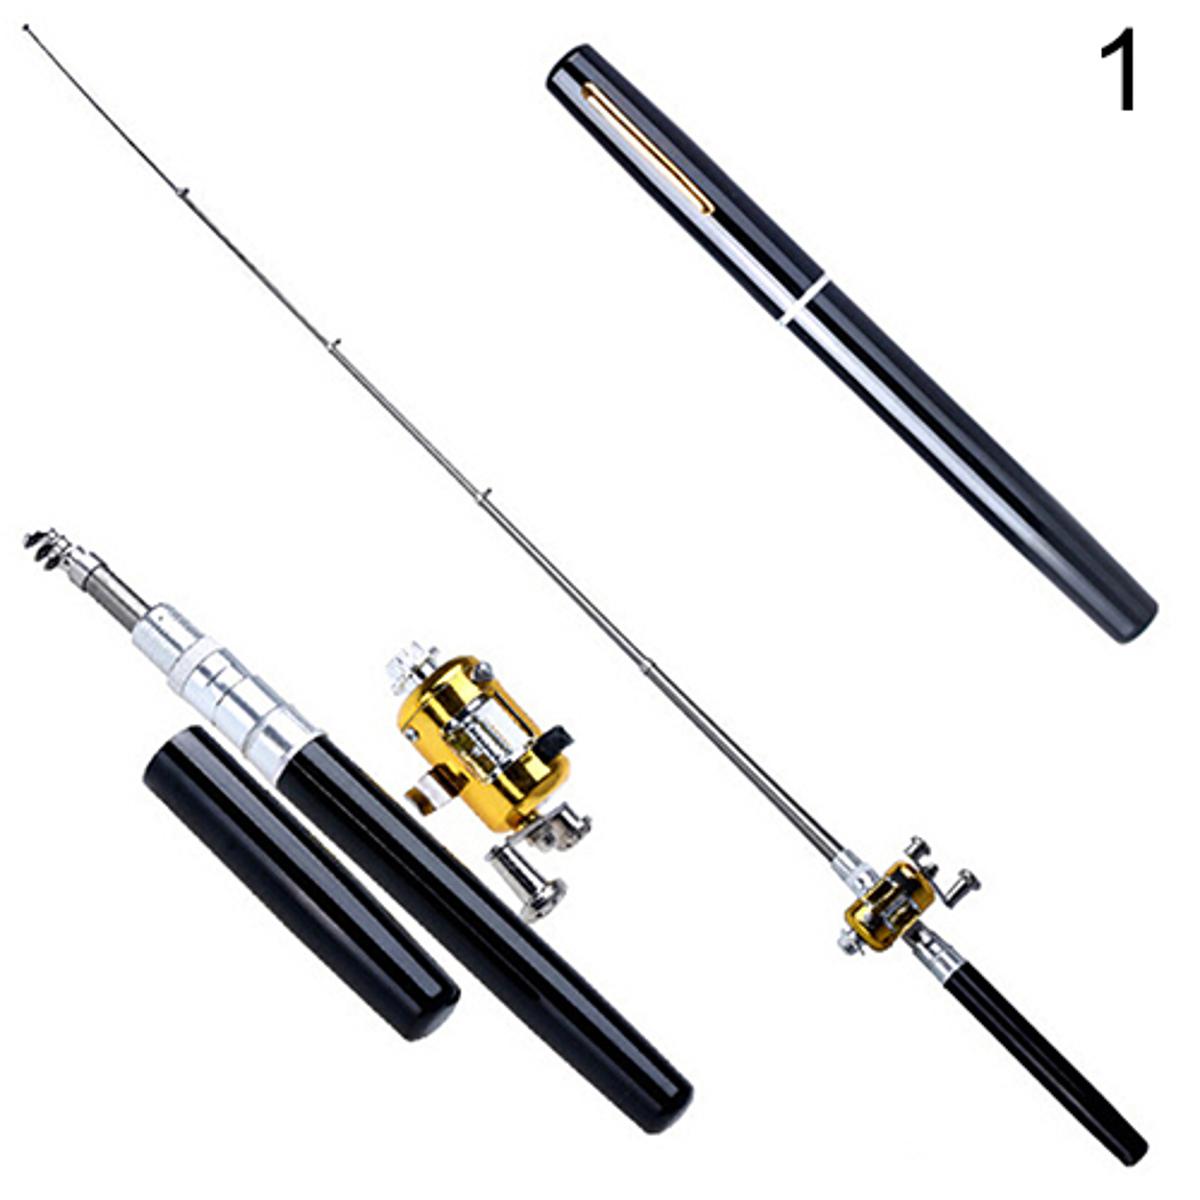 Outdoor Kids Portable Ice Fishing Rod Plastic Pole With Reels